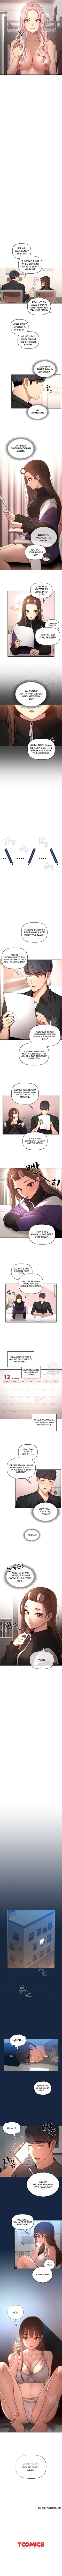 private-tutoring-in-these-trying-times-chap-37-3